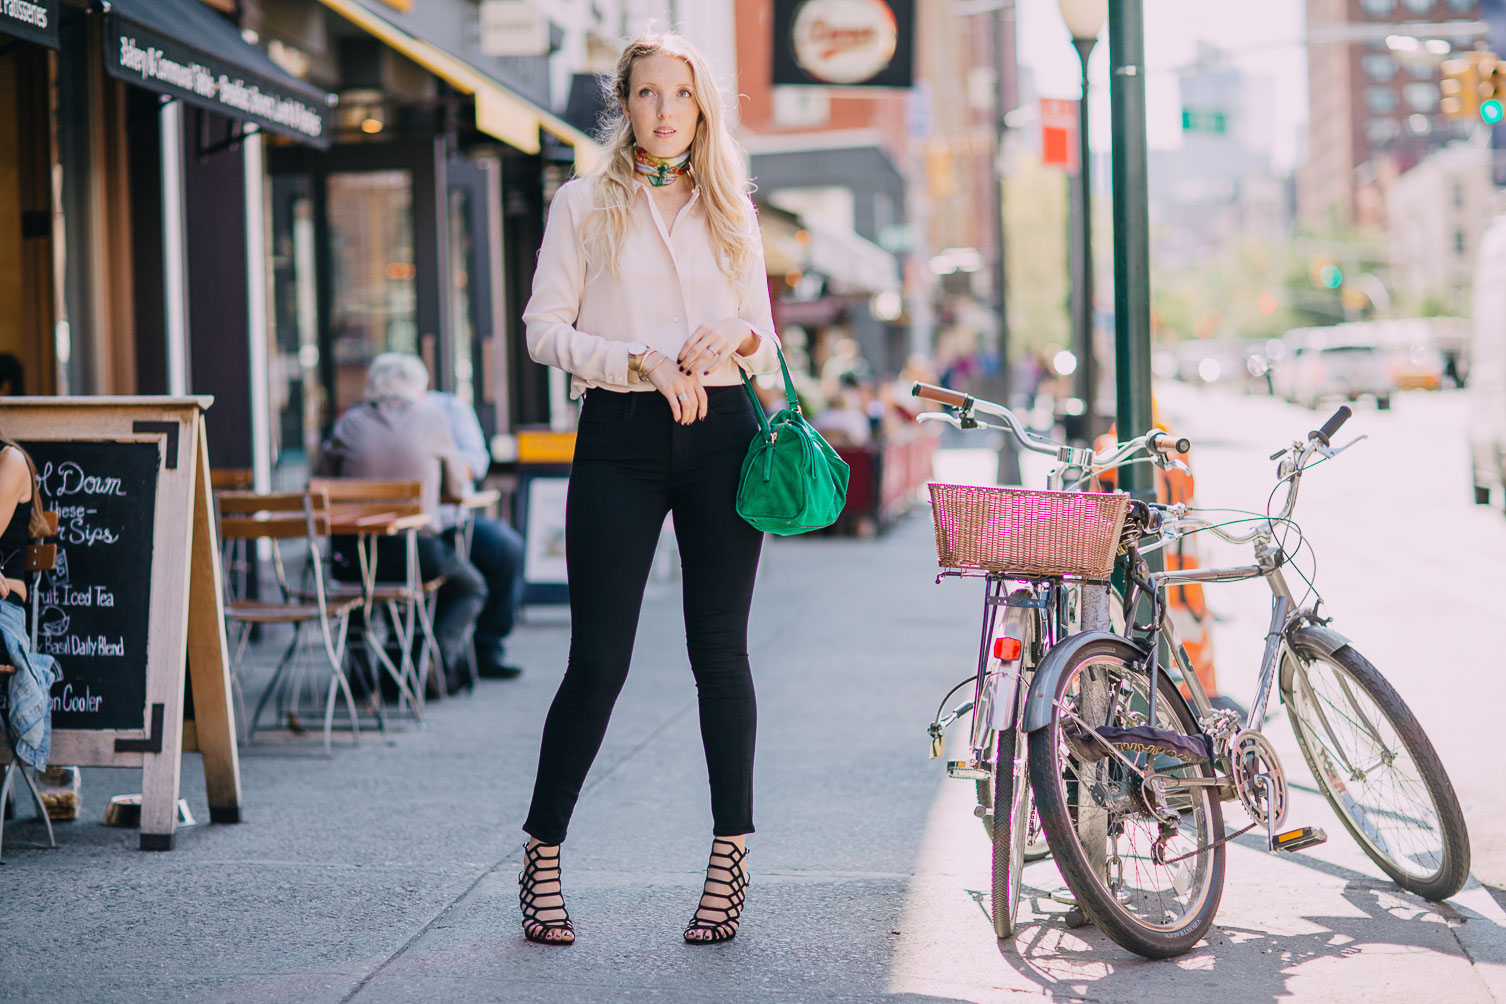 rose quartz silk blouse with jet black skinny jeans and an emerald bag on Leslie Musser one brass fox